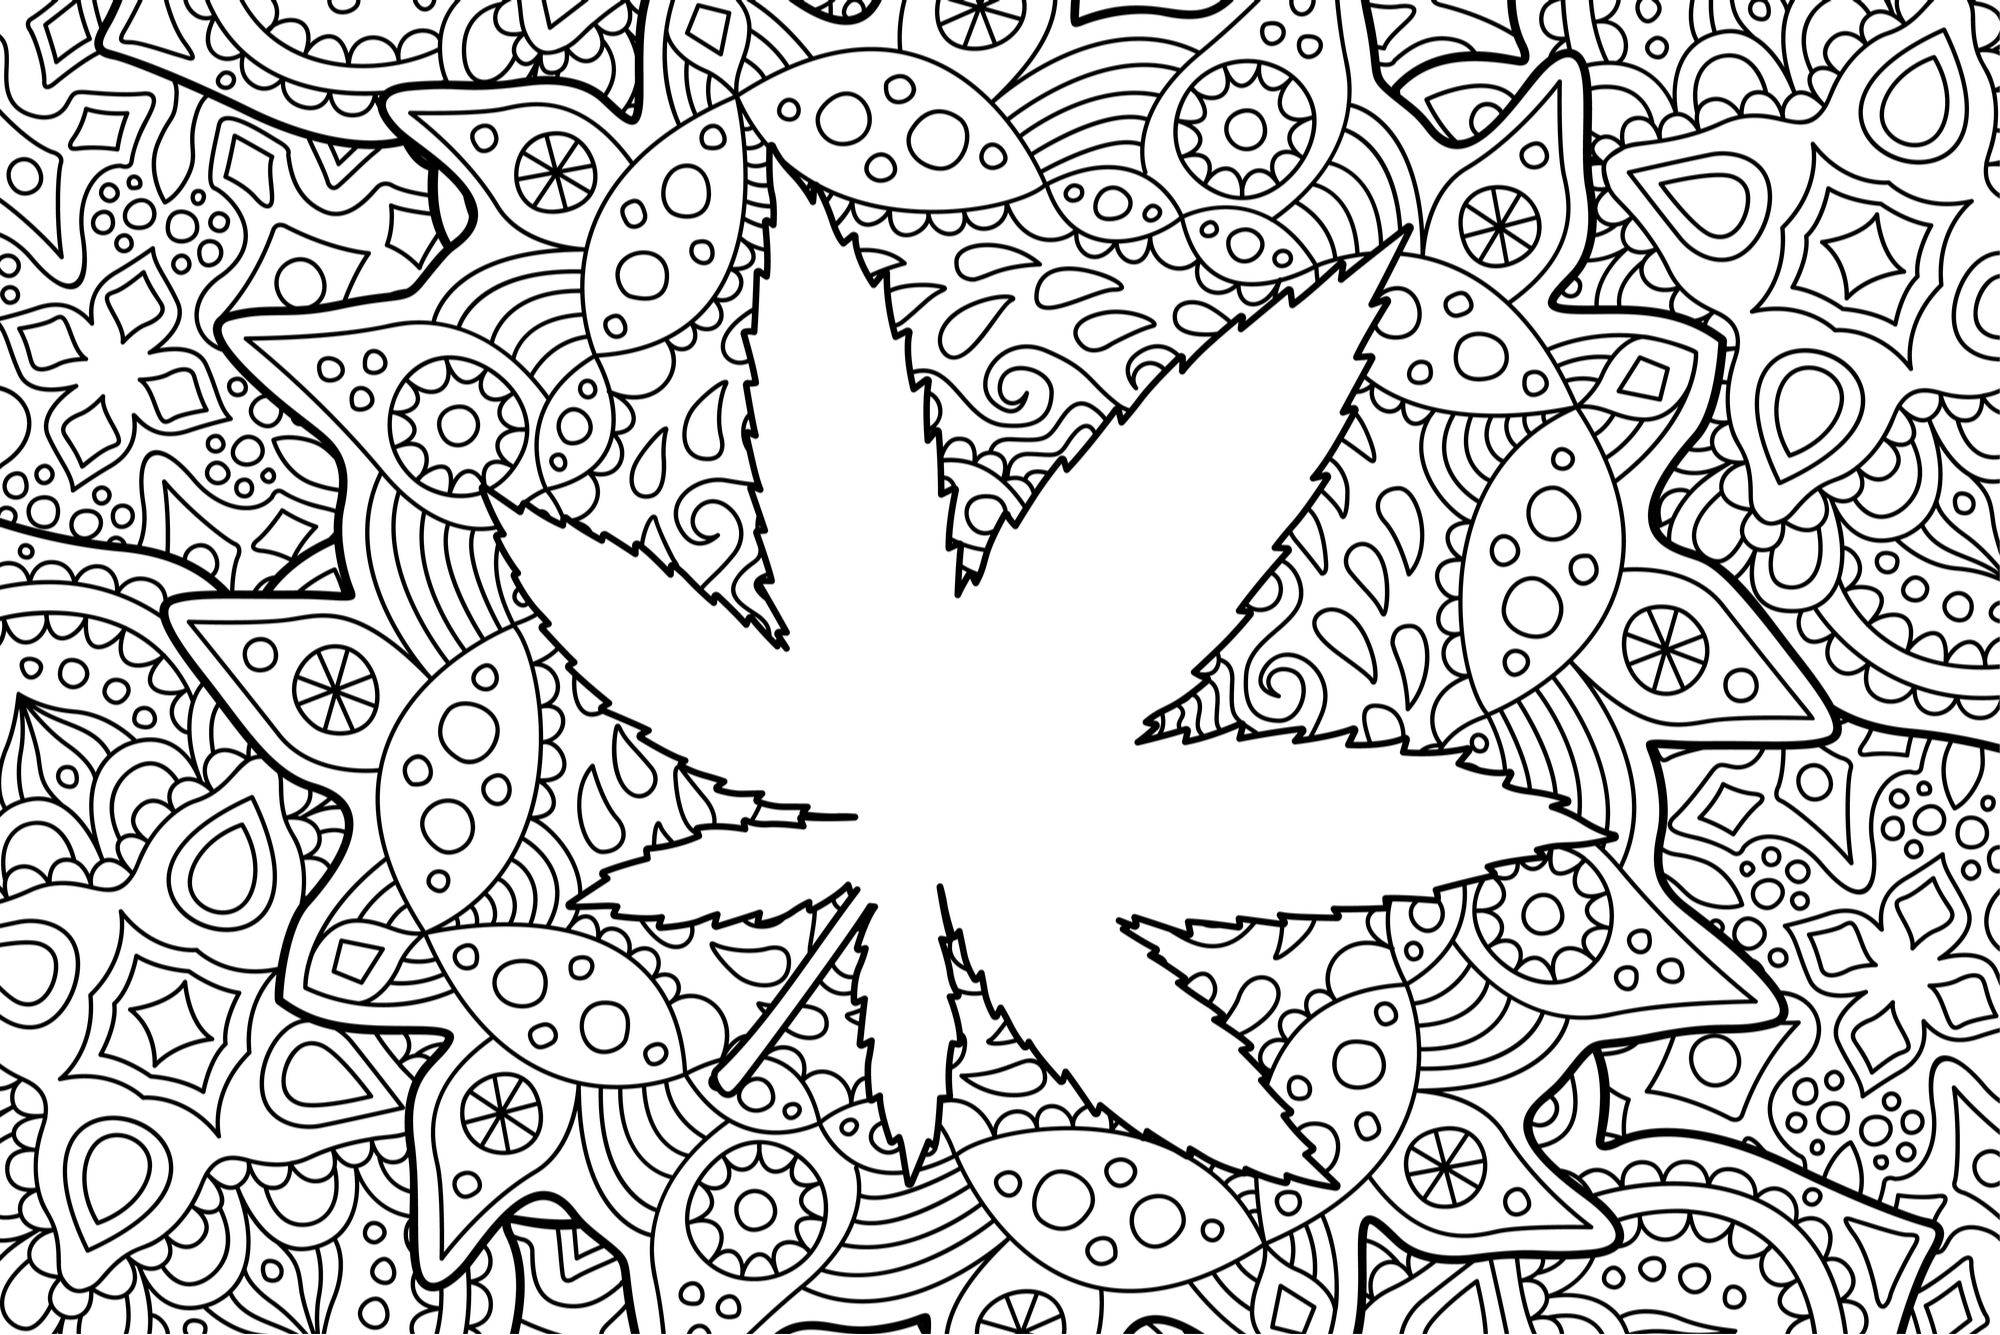 Top 5 Cannabis Coloring Books for the Artistic Stoner | Leafbuyer